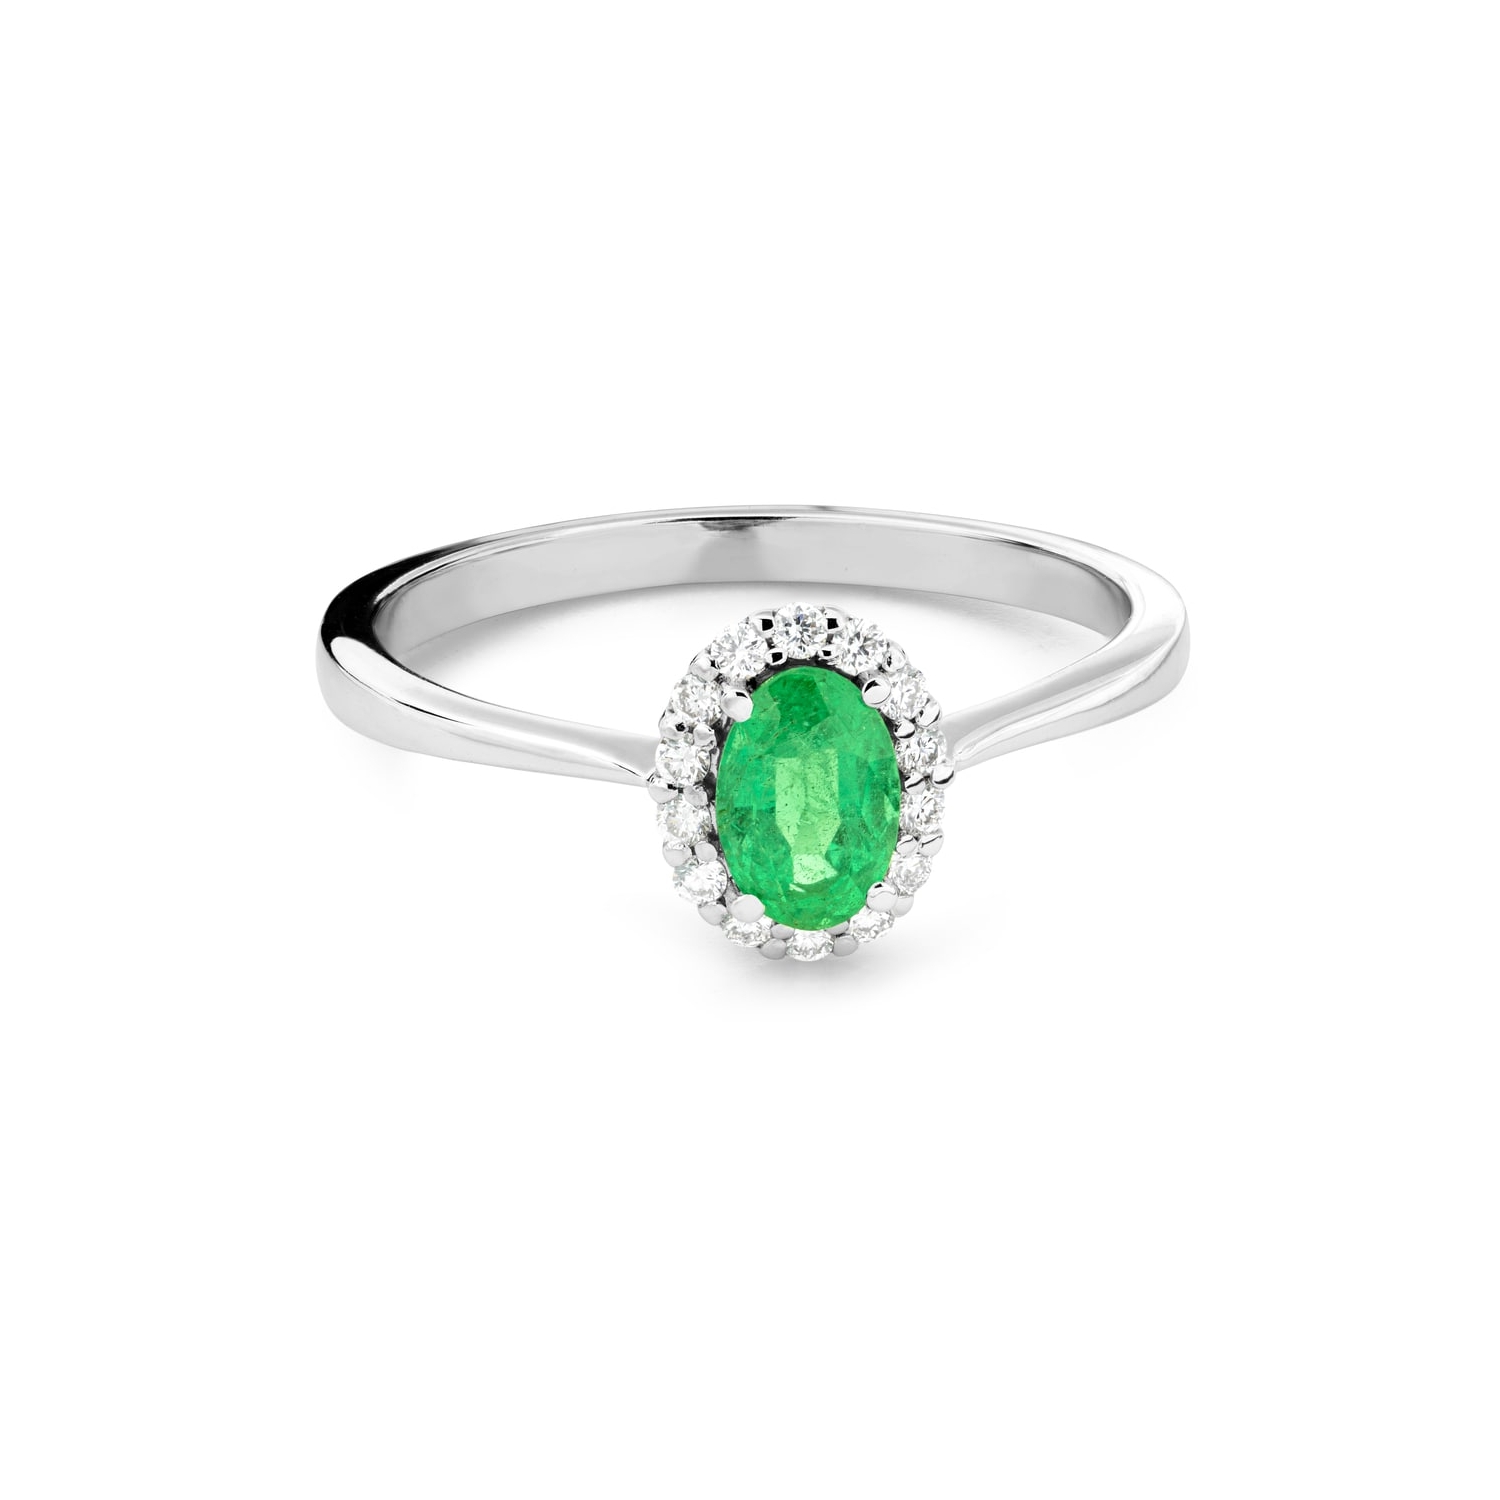 Engagement ring with gemstones "Emerald 69"